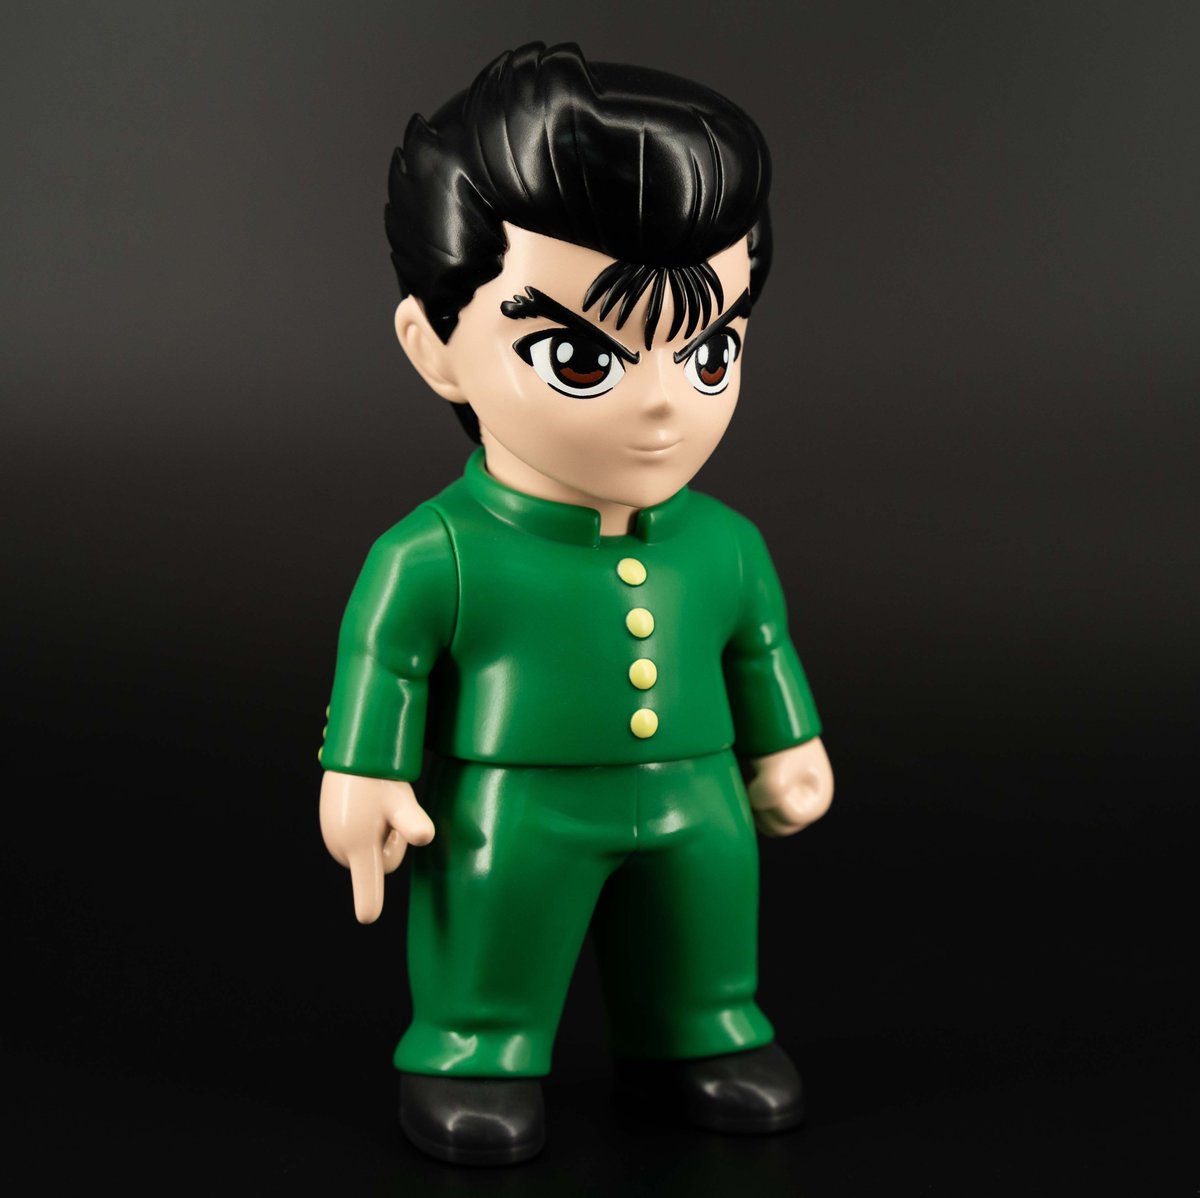 Merchandise Archives - The Unofficial Home of Yu Yu Hakusho